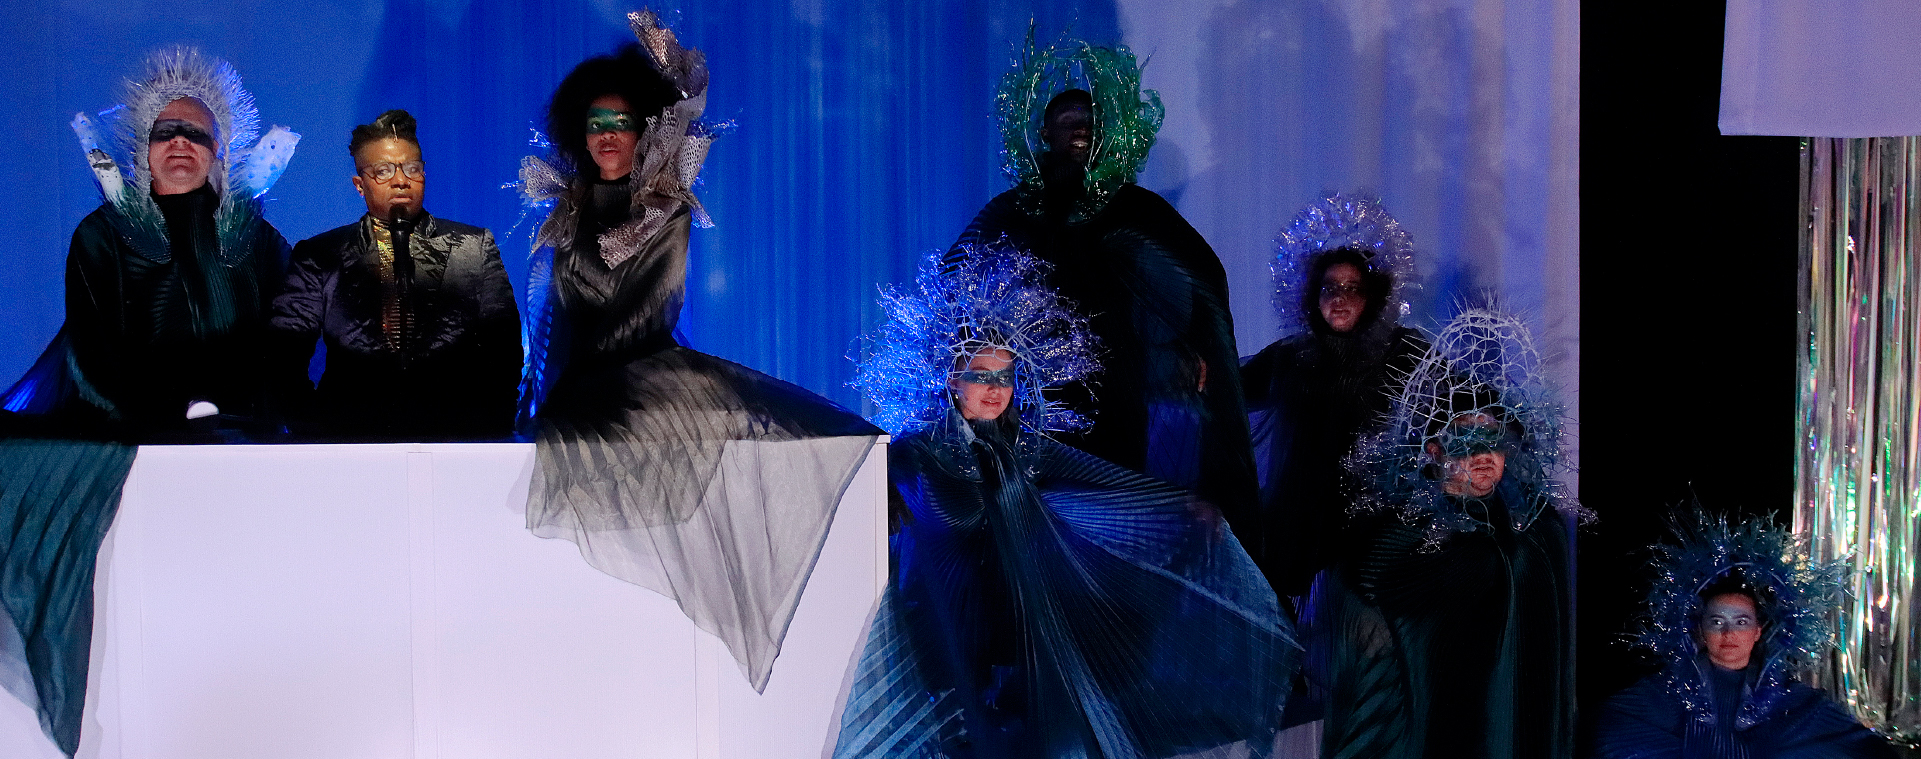 A performance with the main character speaking into a microphone behind a large podium surrounded by people in dark flowing costumes and elaborate headdresses in front of a blue backdrop.